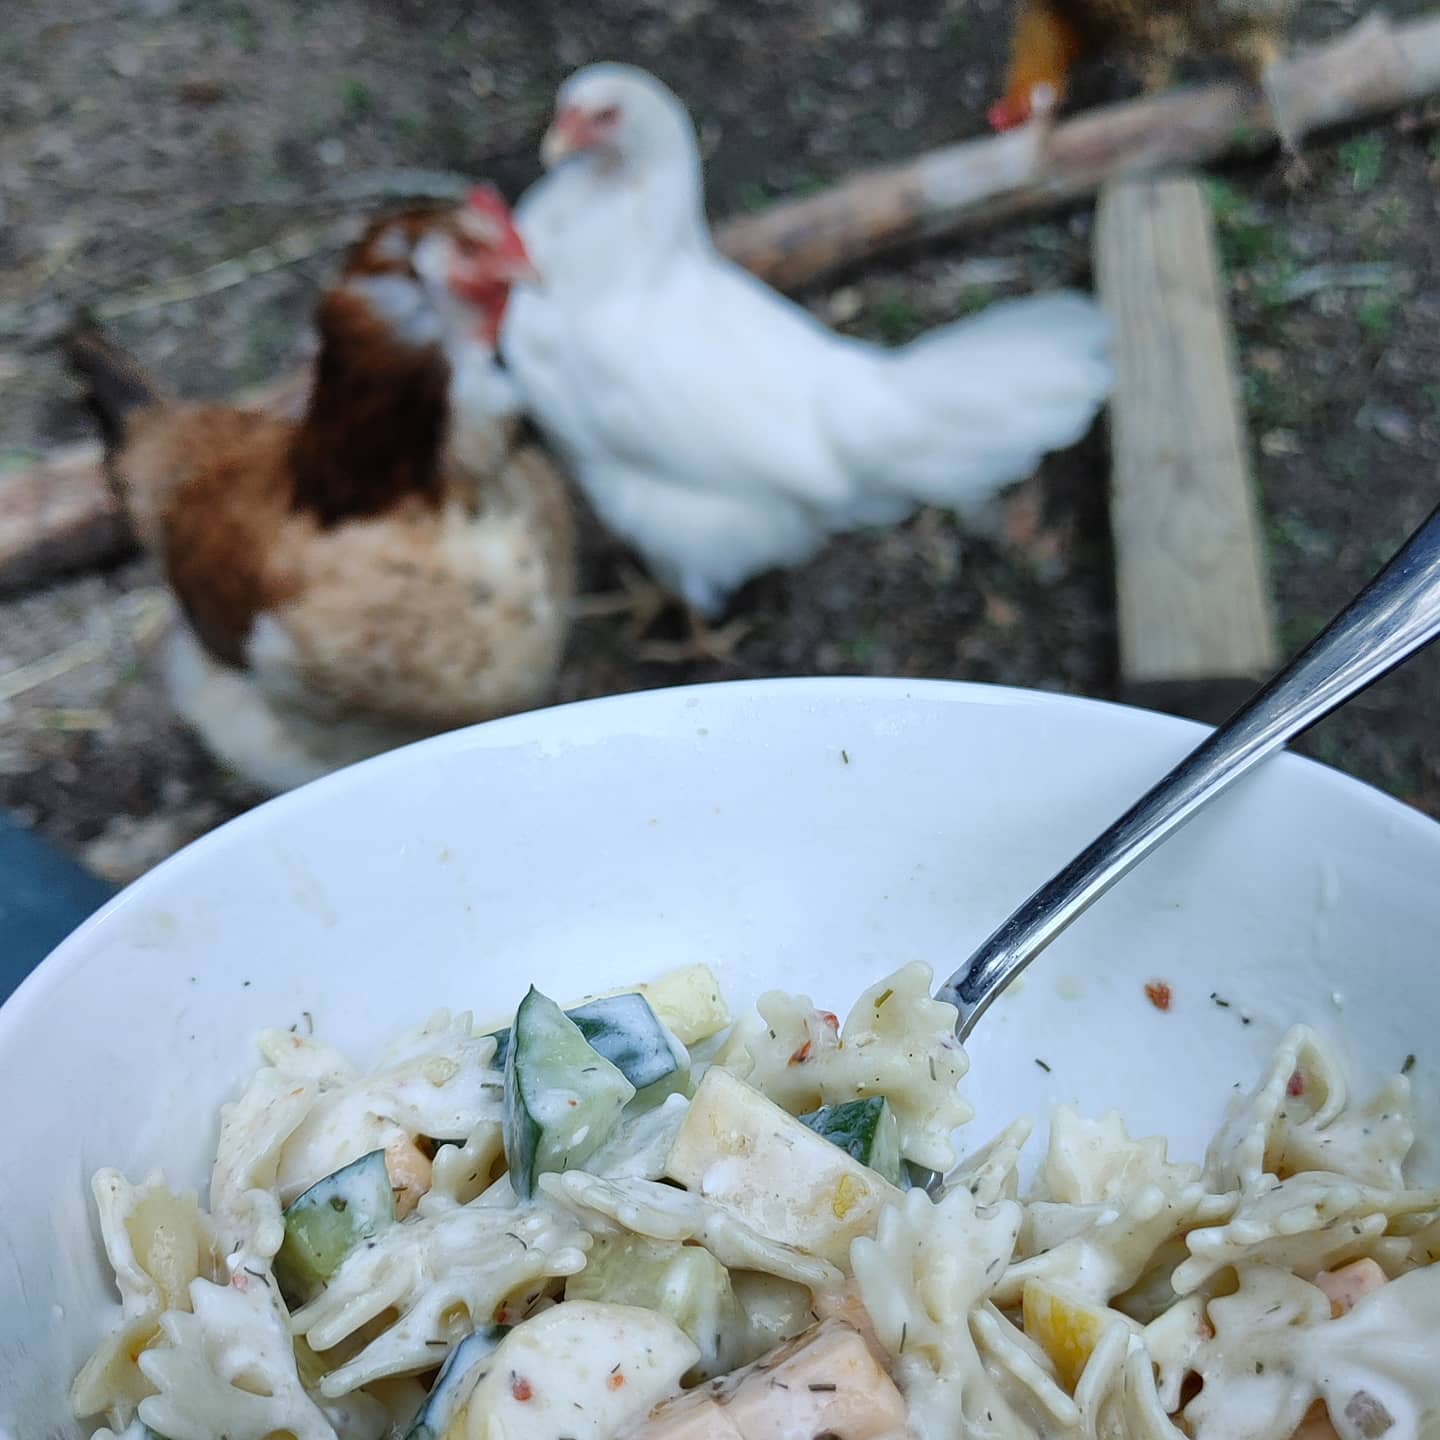 I wanted to eat dinner while supervising the chickens free range time. What I got was the chickens supervising me while I ate dinner. How do they know?